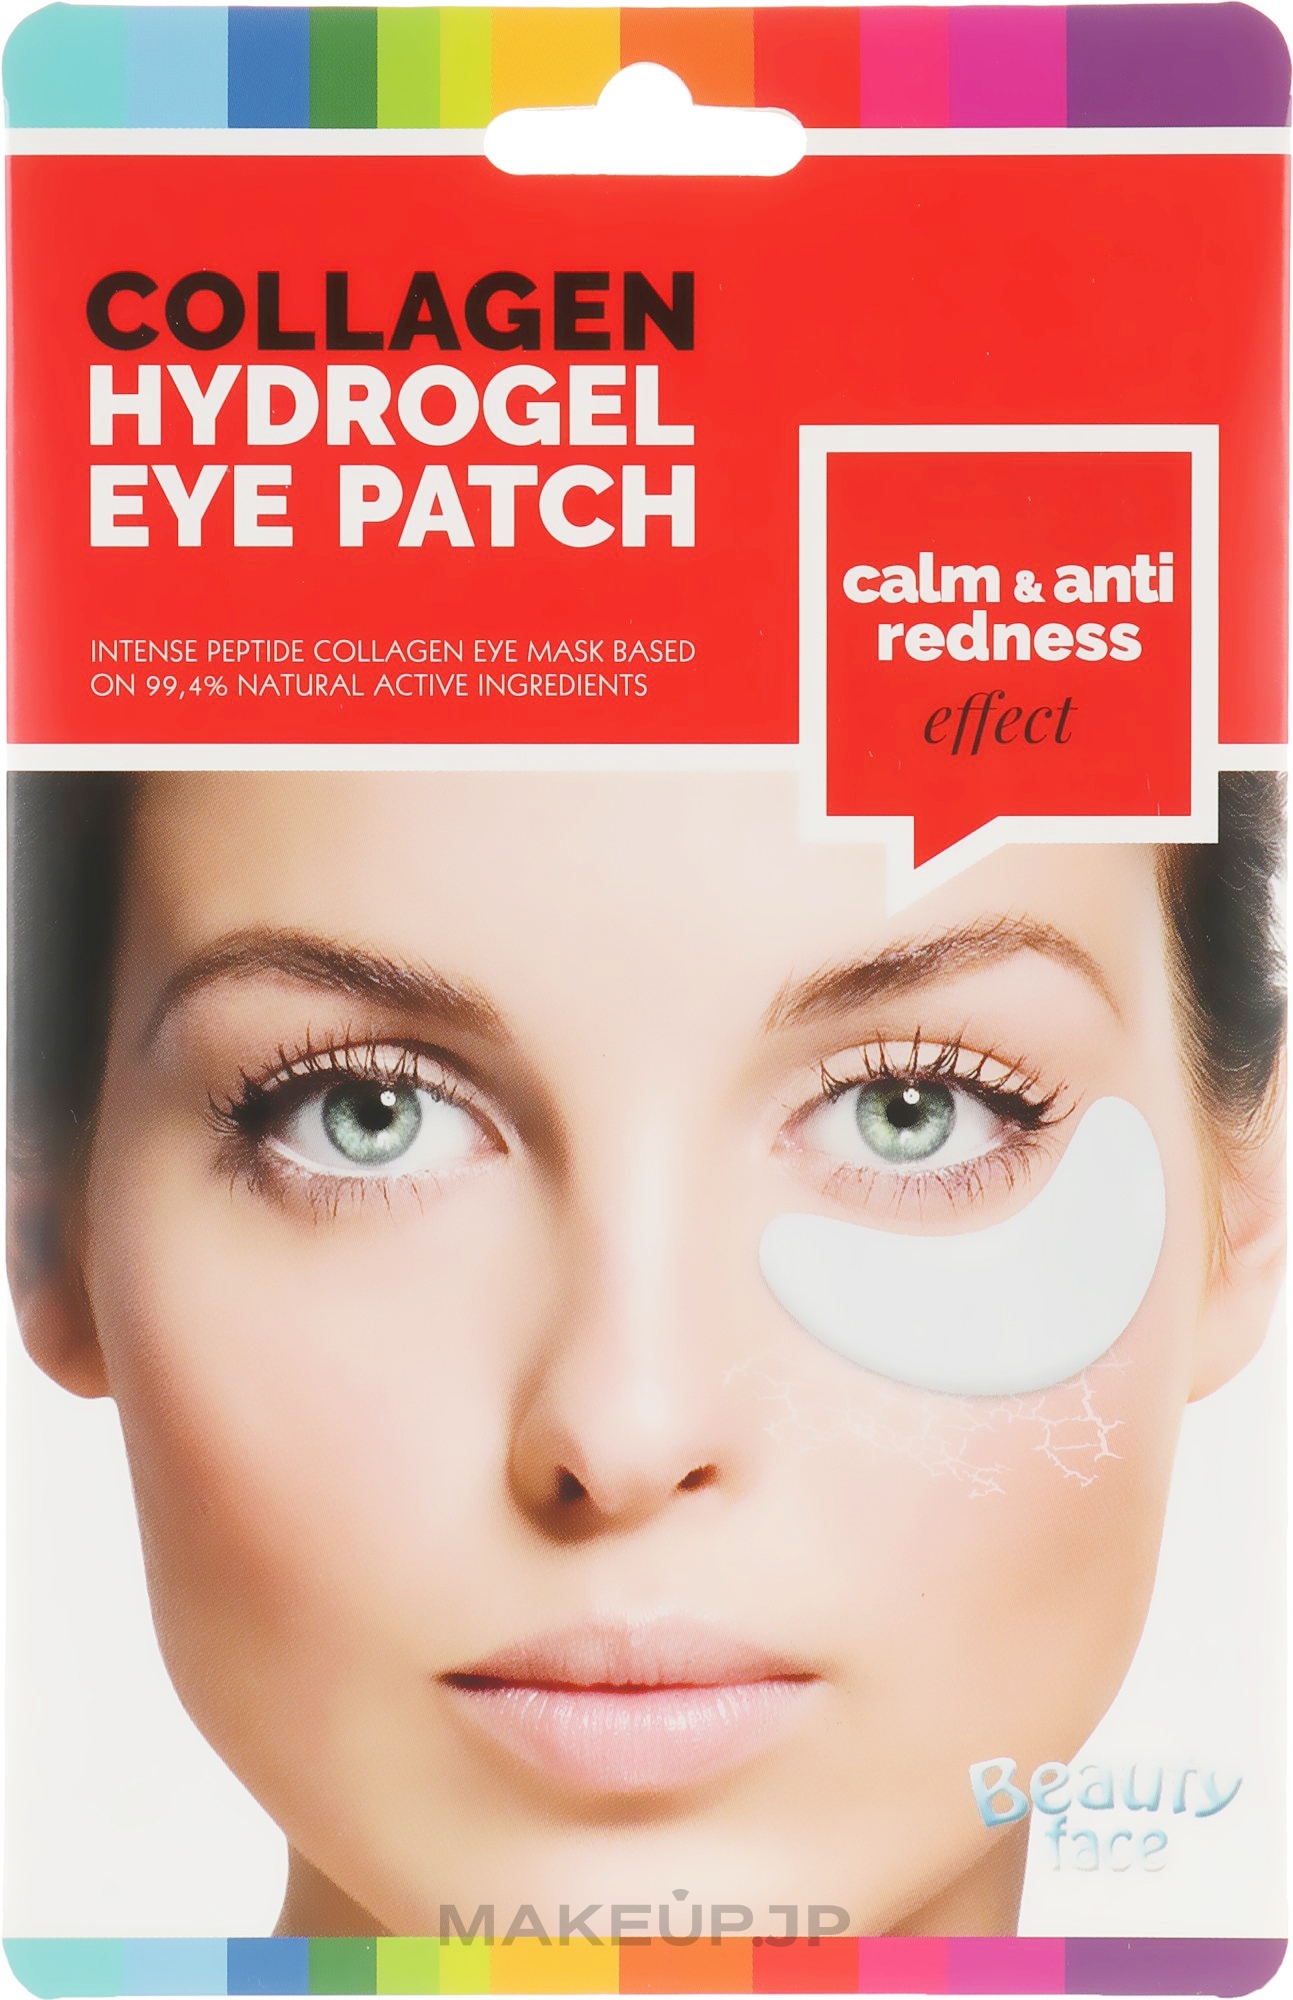 Collagen Hydrogel Eye Patches - Beauty Face Collagen Hydrogel Eye Patch — photo 8 g